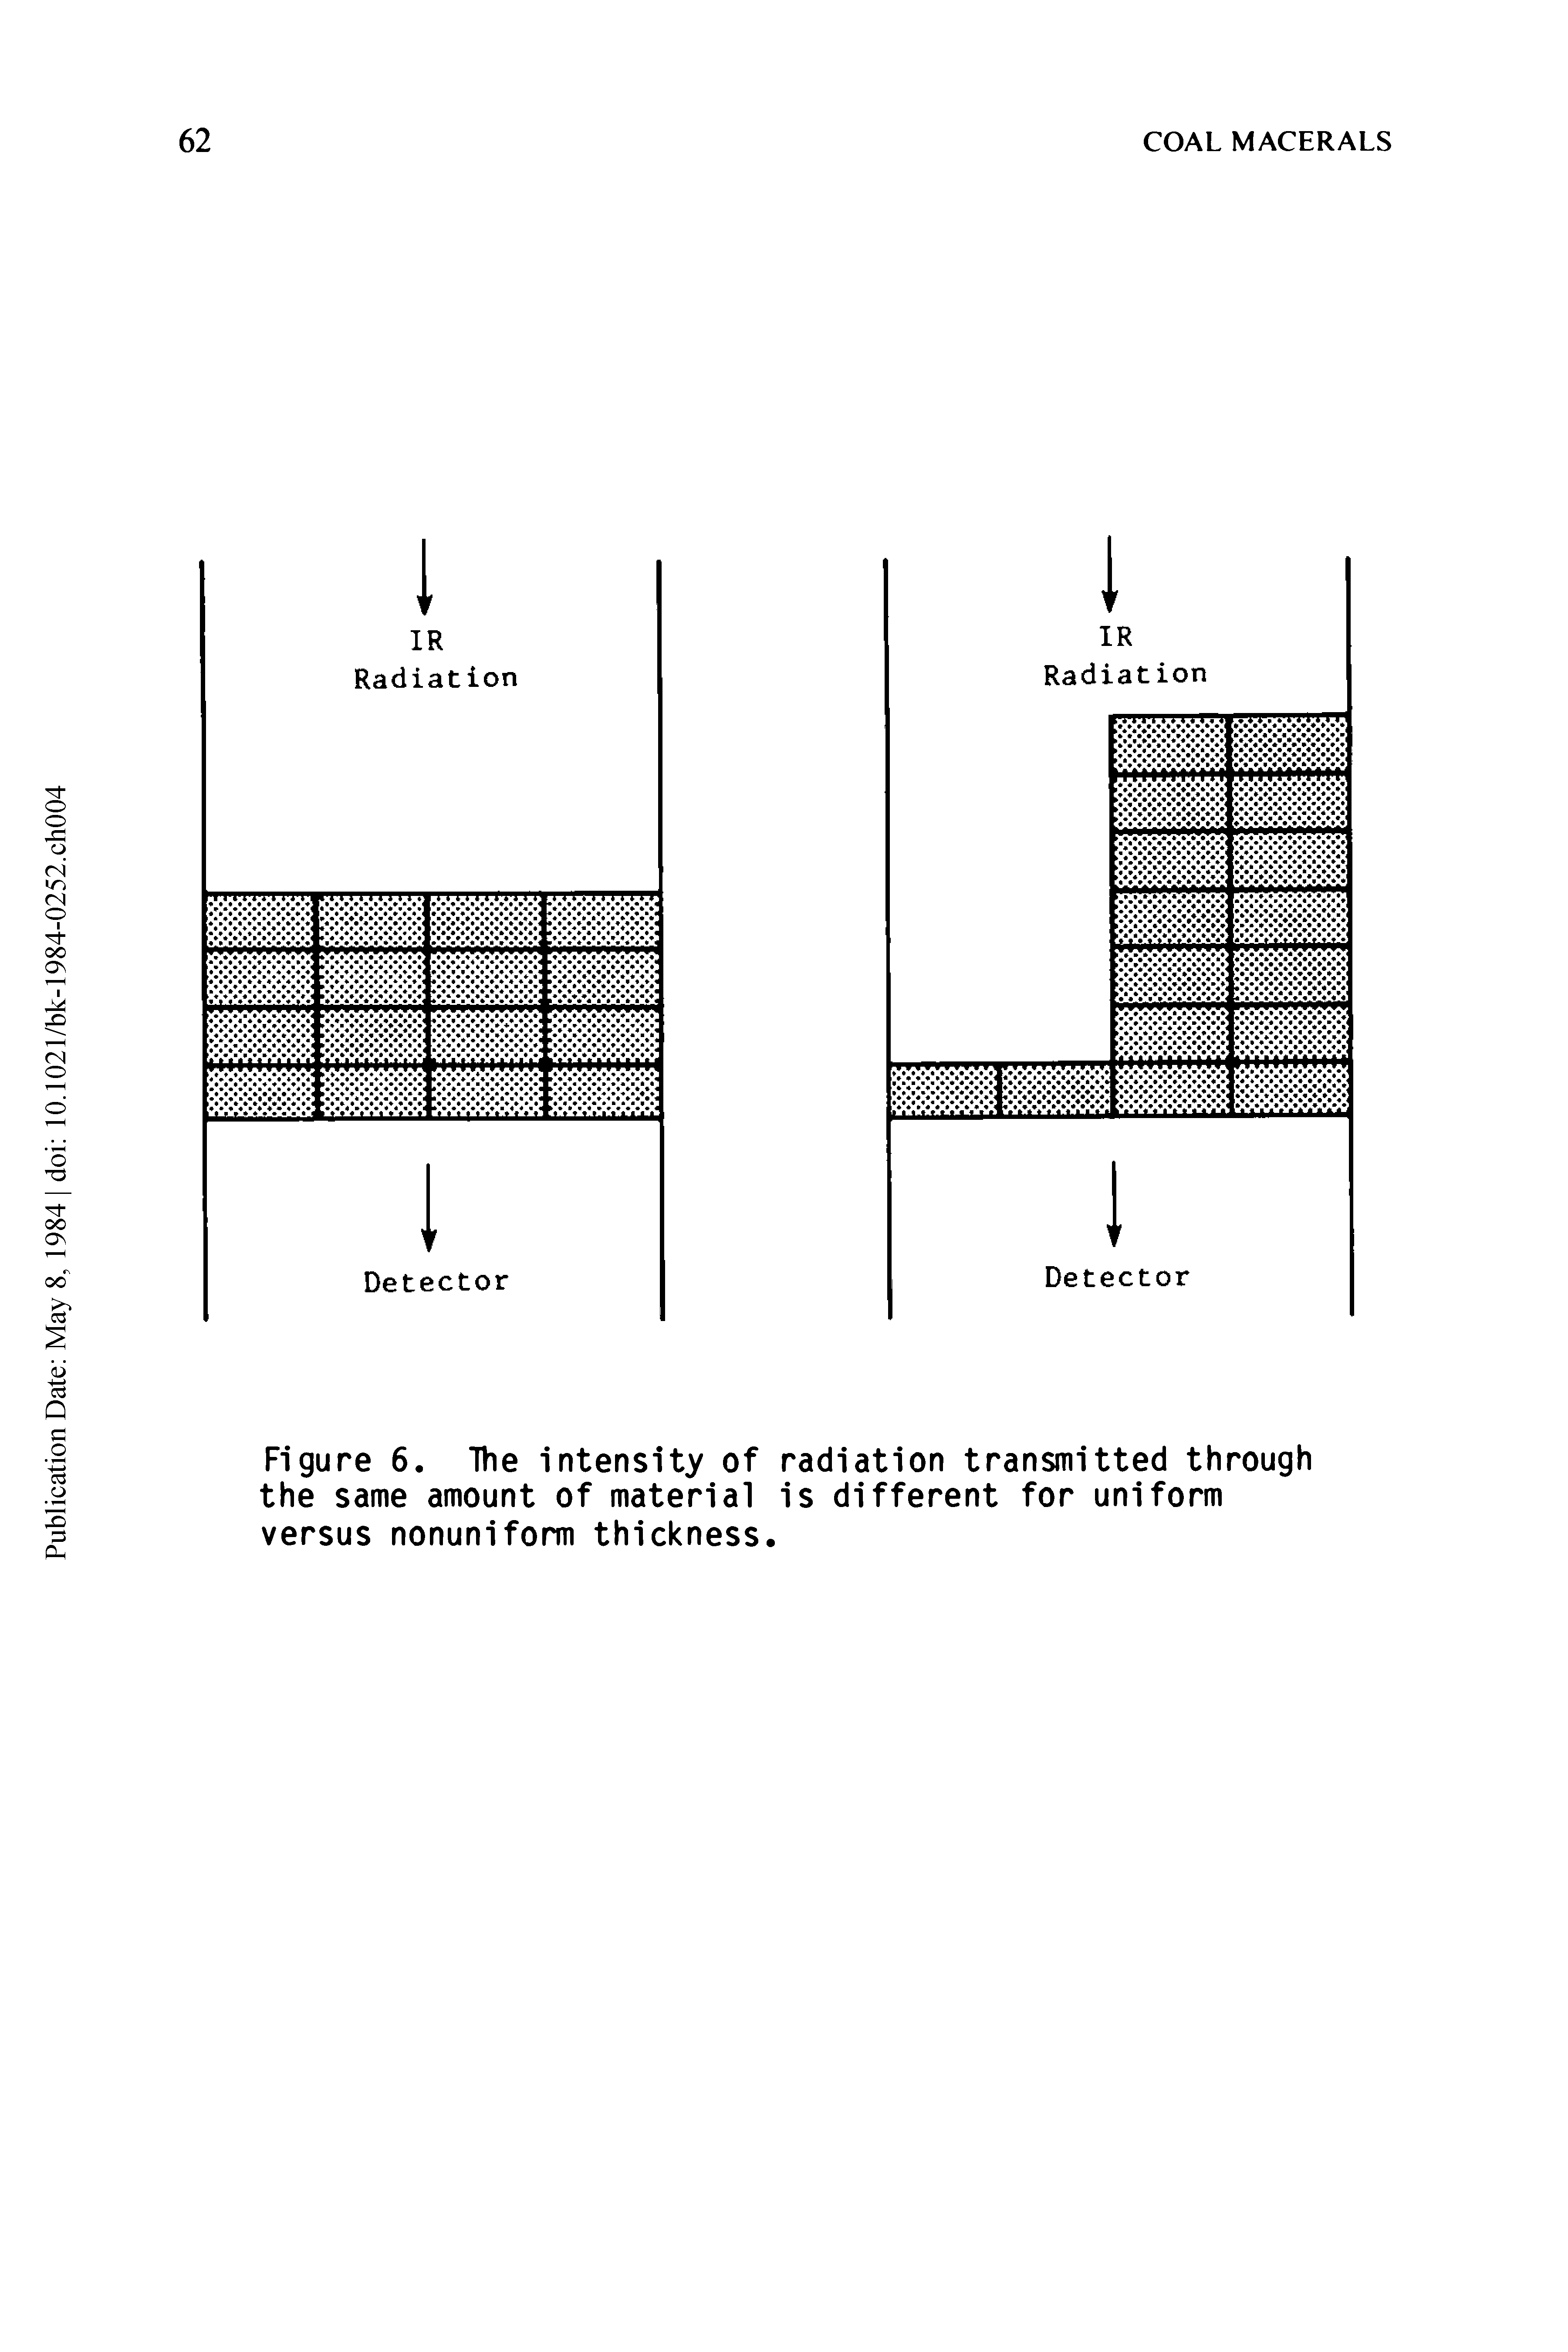 Figure 6. The intensity of radiation transmitted through the same amount of material is different for uniform versus nonuniform thickness.